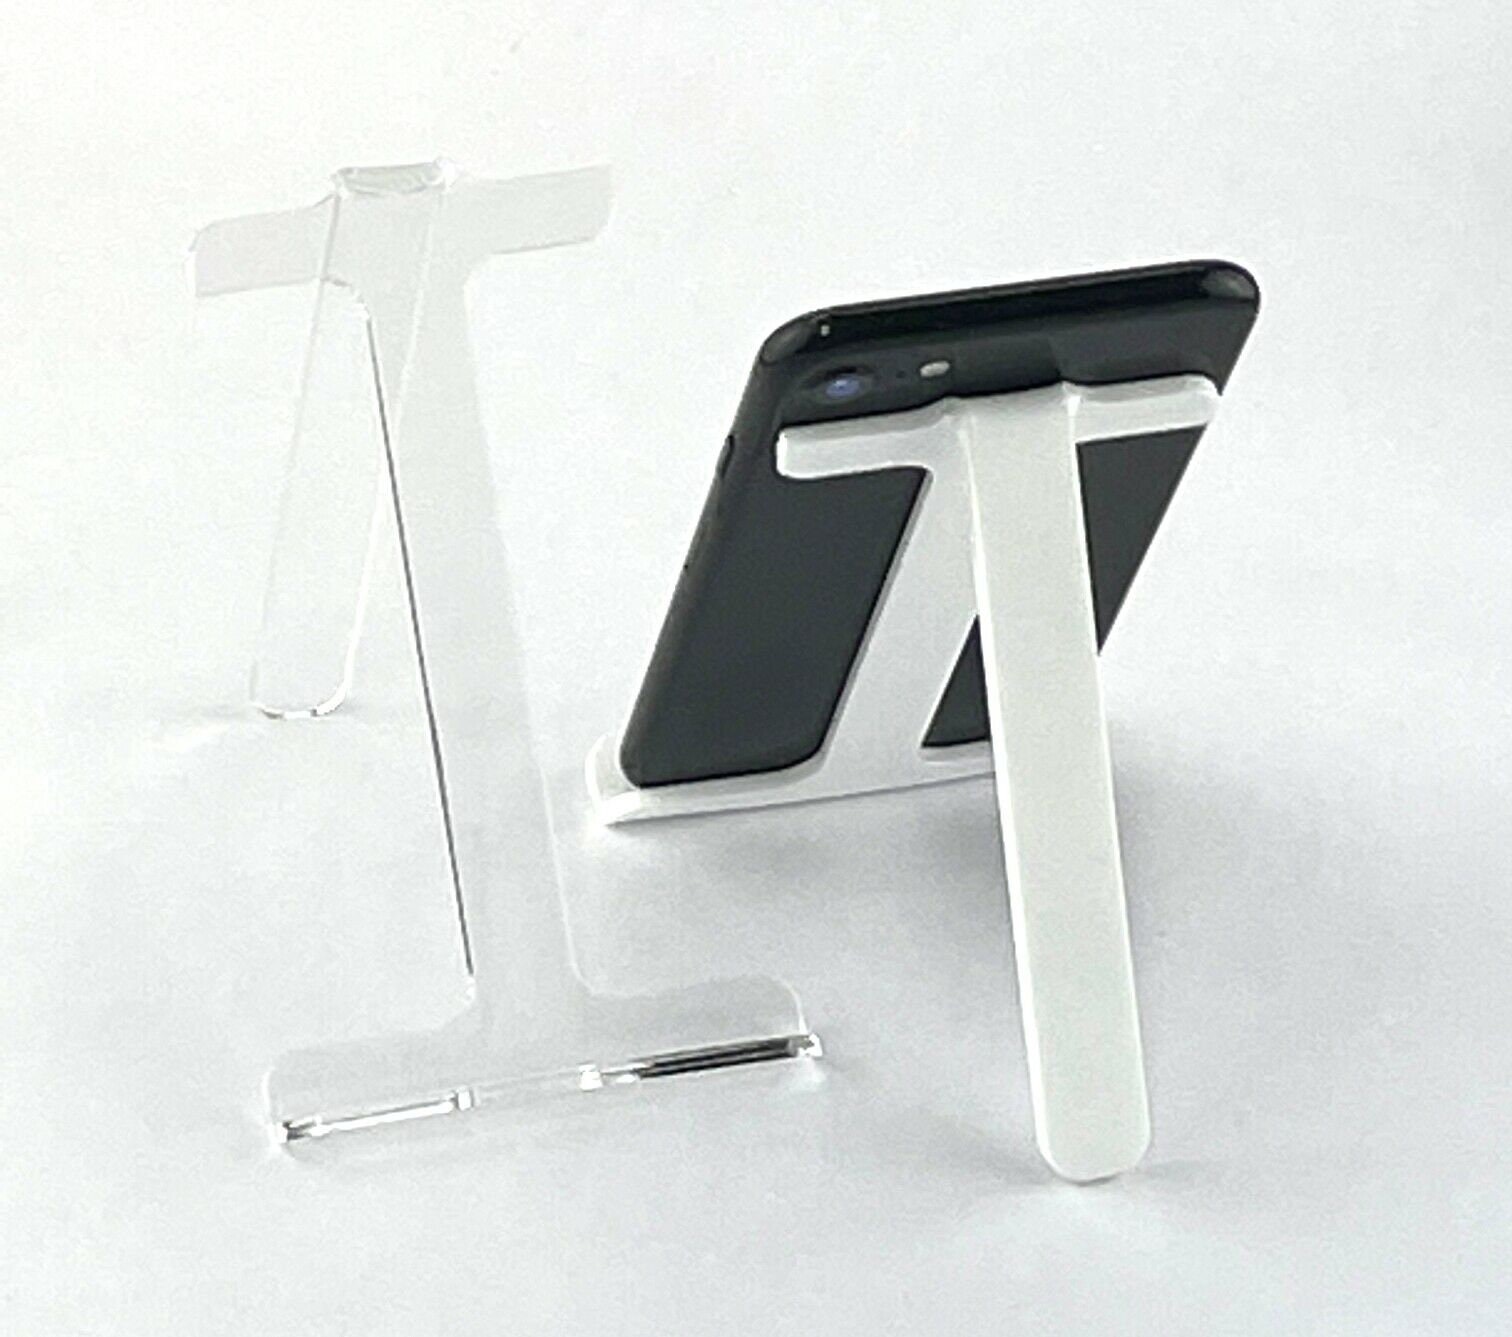 Stylish Acrylic Desktop Phone Stand for iPhone Laser Cut in UK